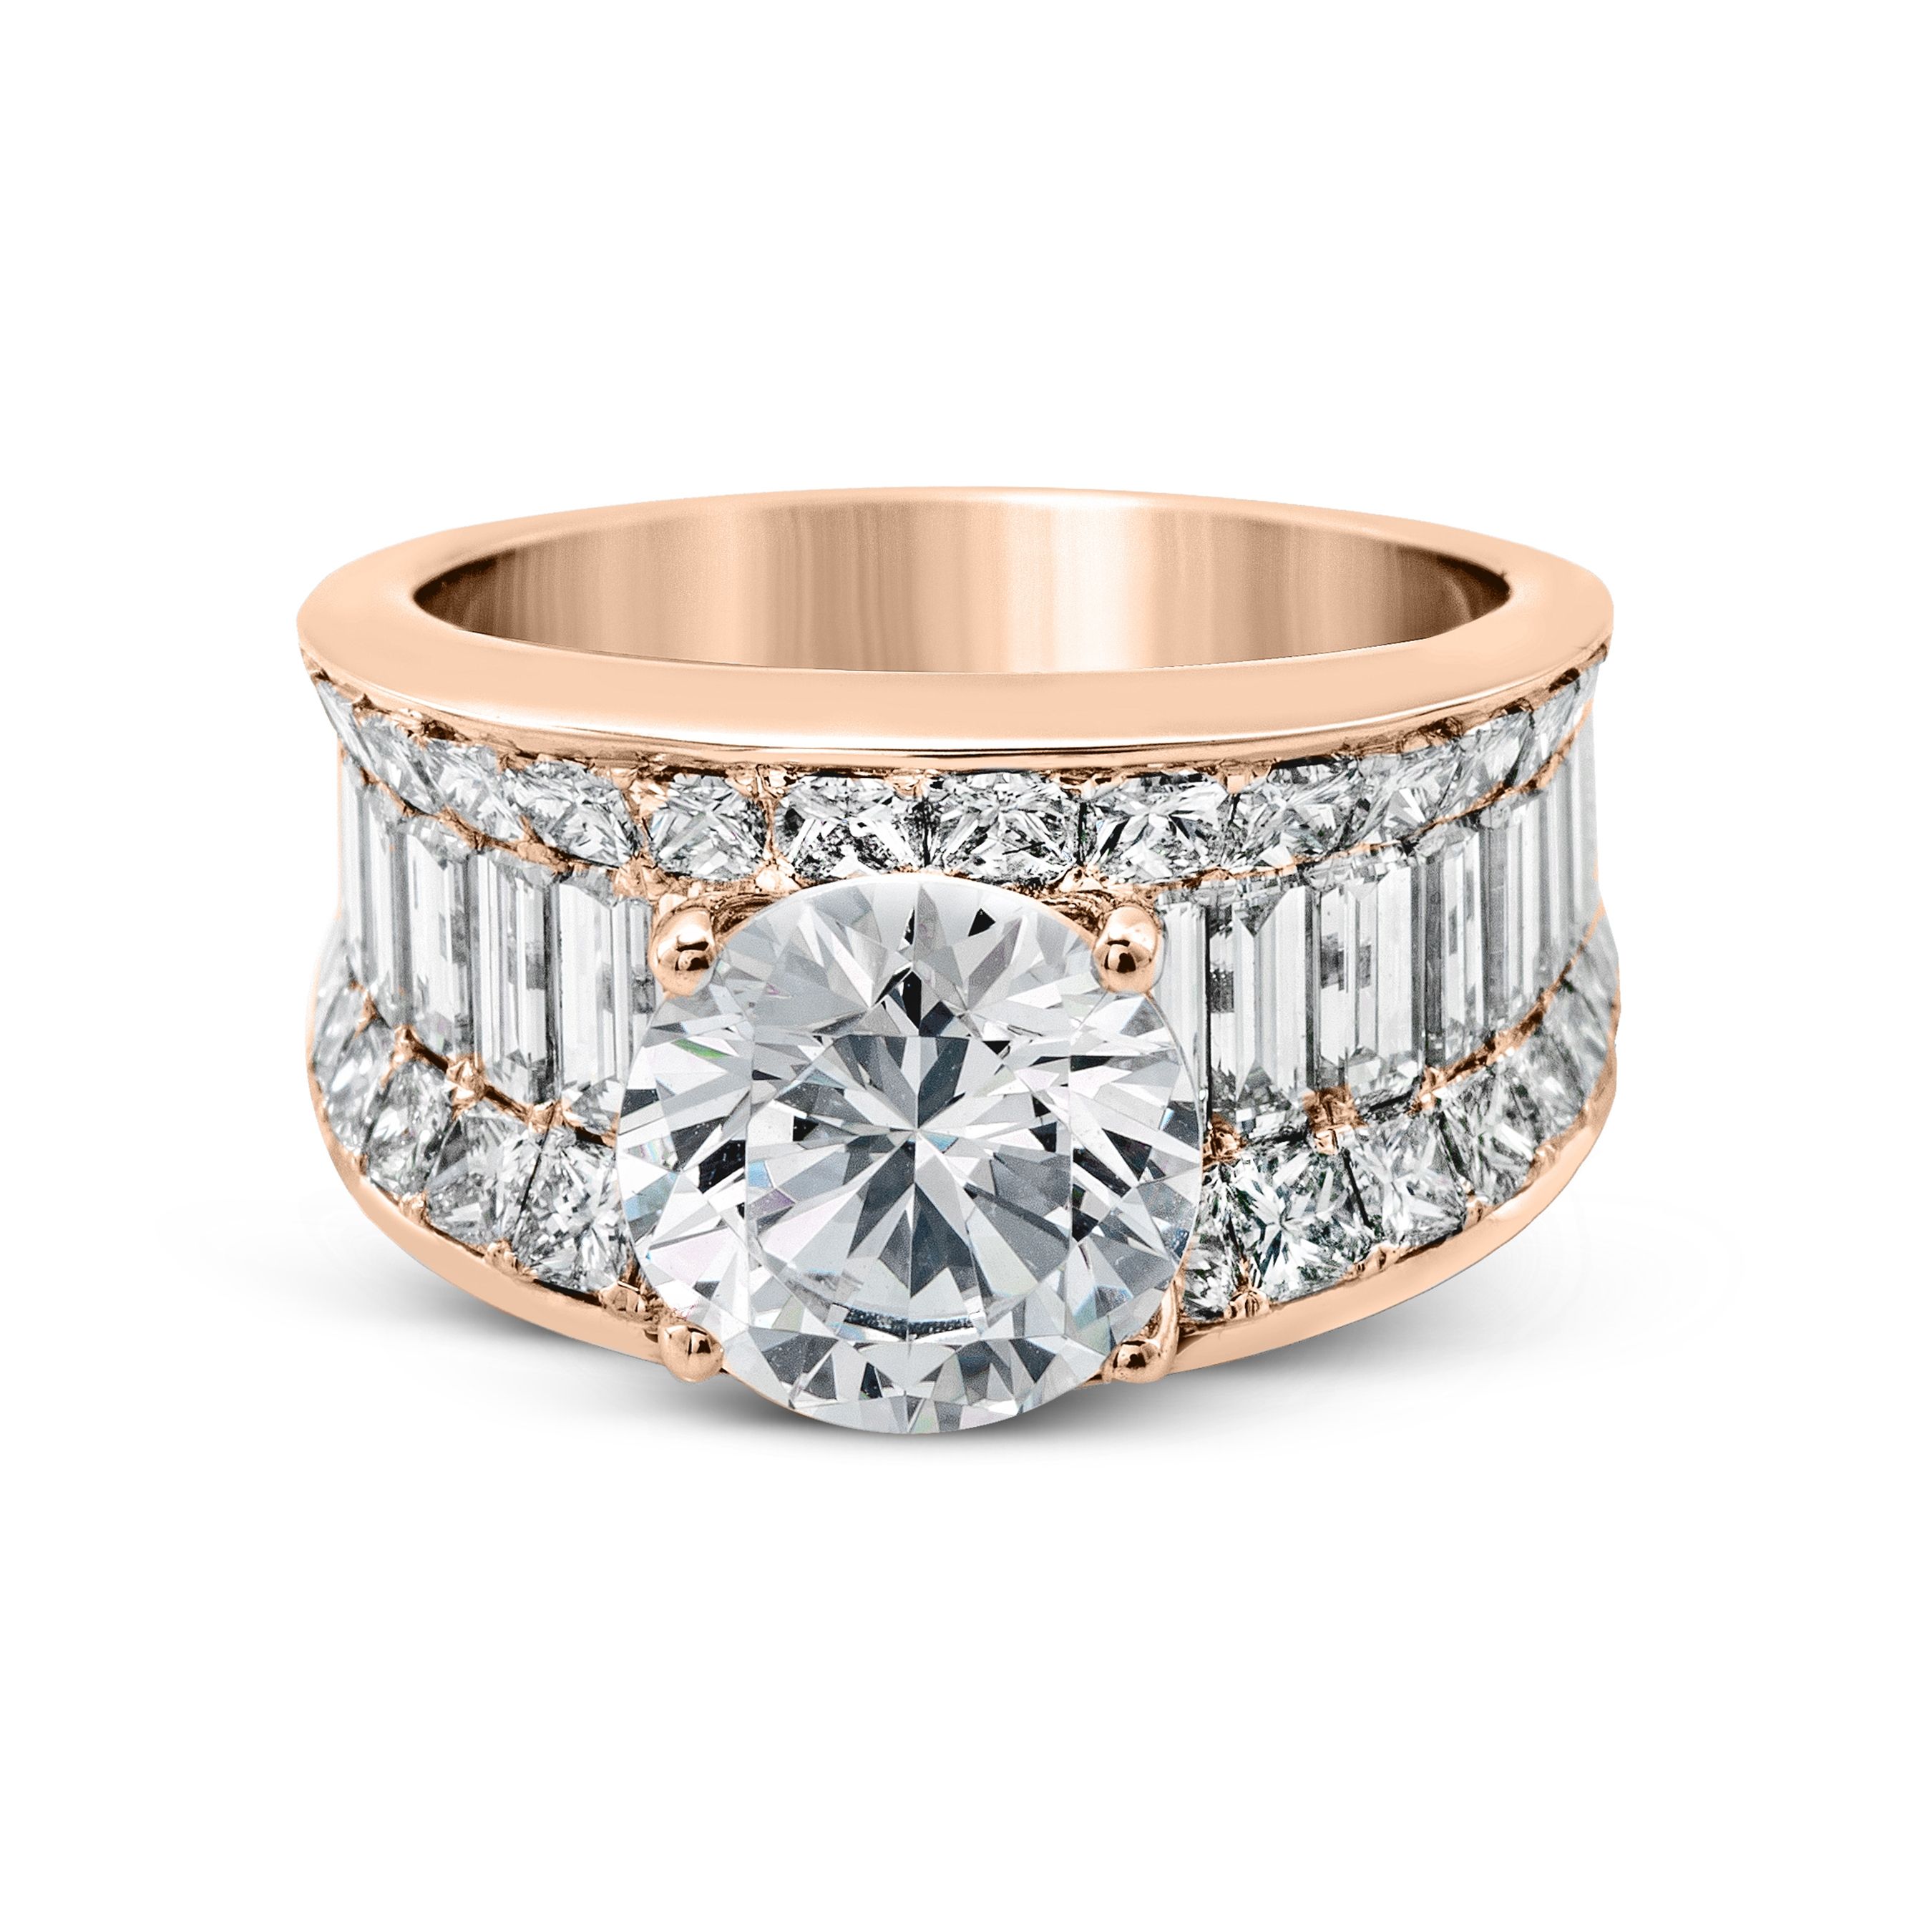 MR1922 Nocturnal Sophistication Collection Rose Gold Round Cut Engagement Ring